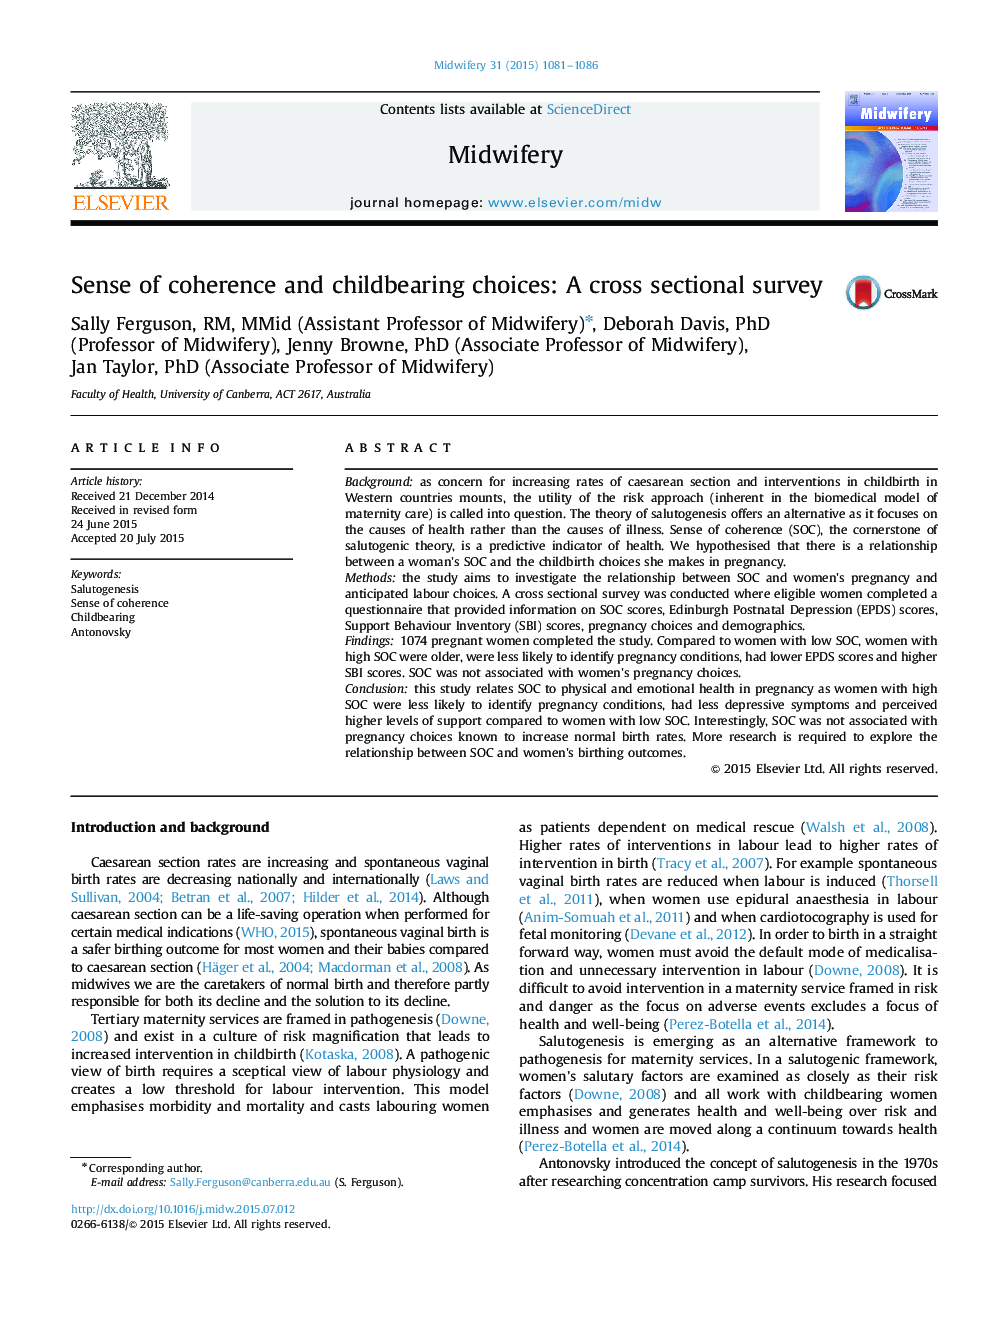 Sense of coherence and childbearing choices: A cross sectional survey